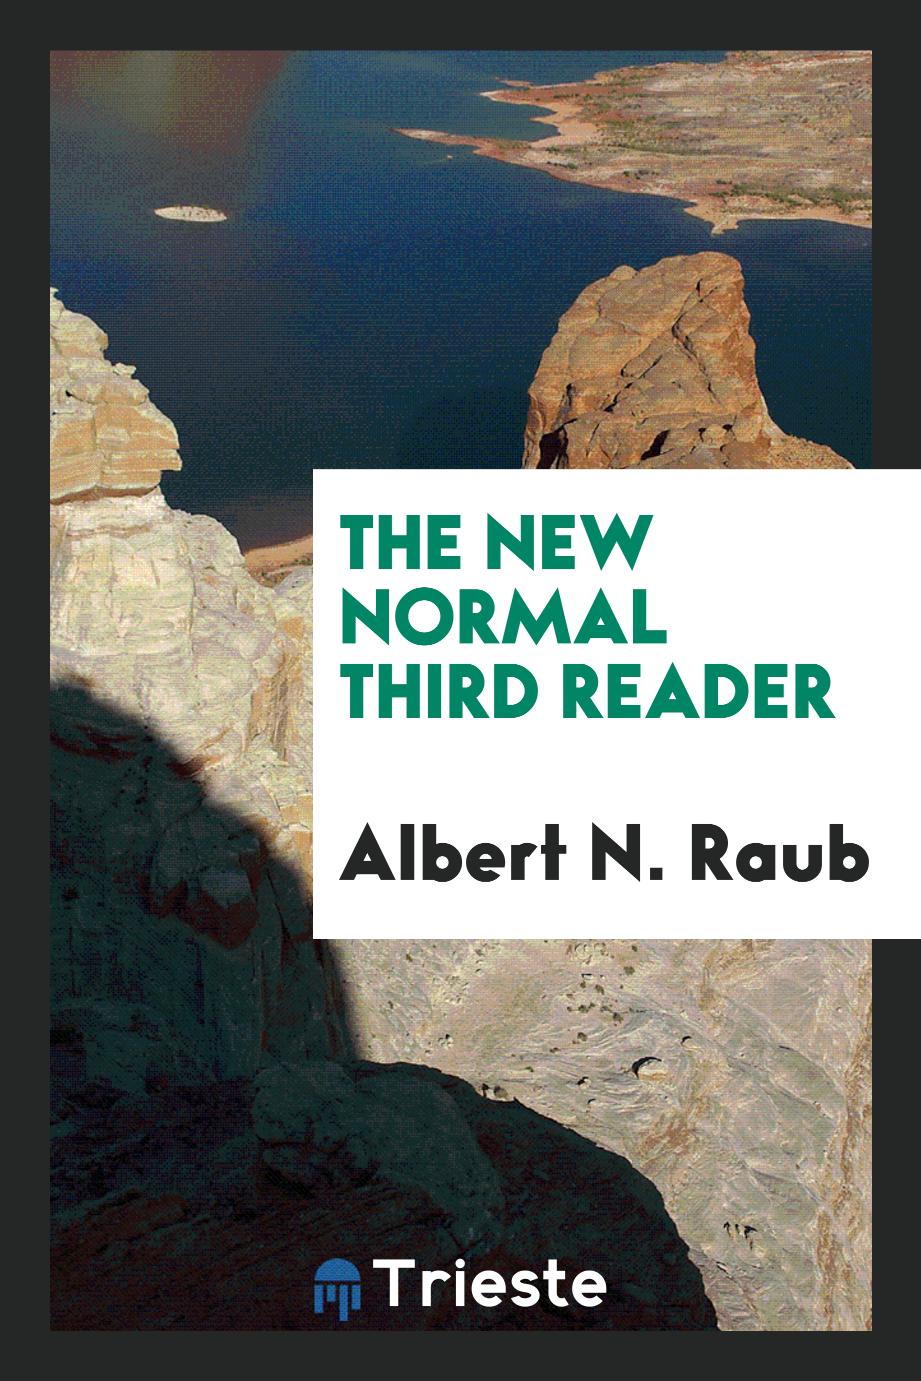 The New Normal Third Reader